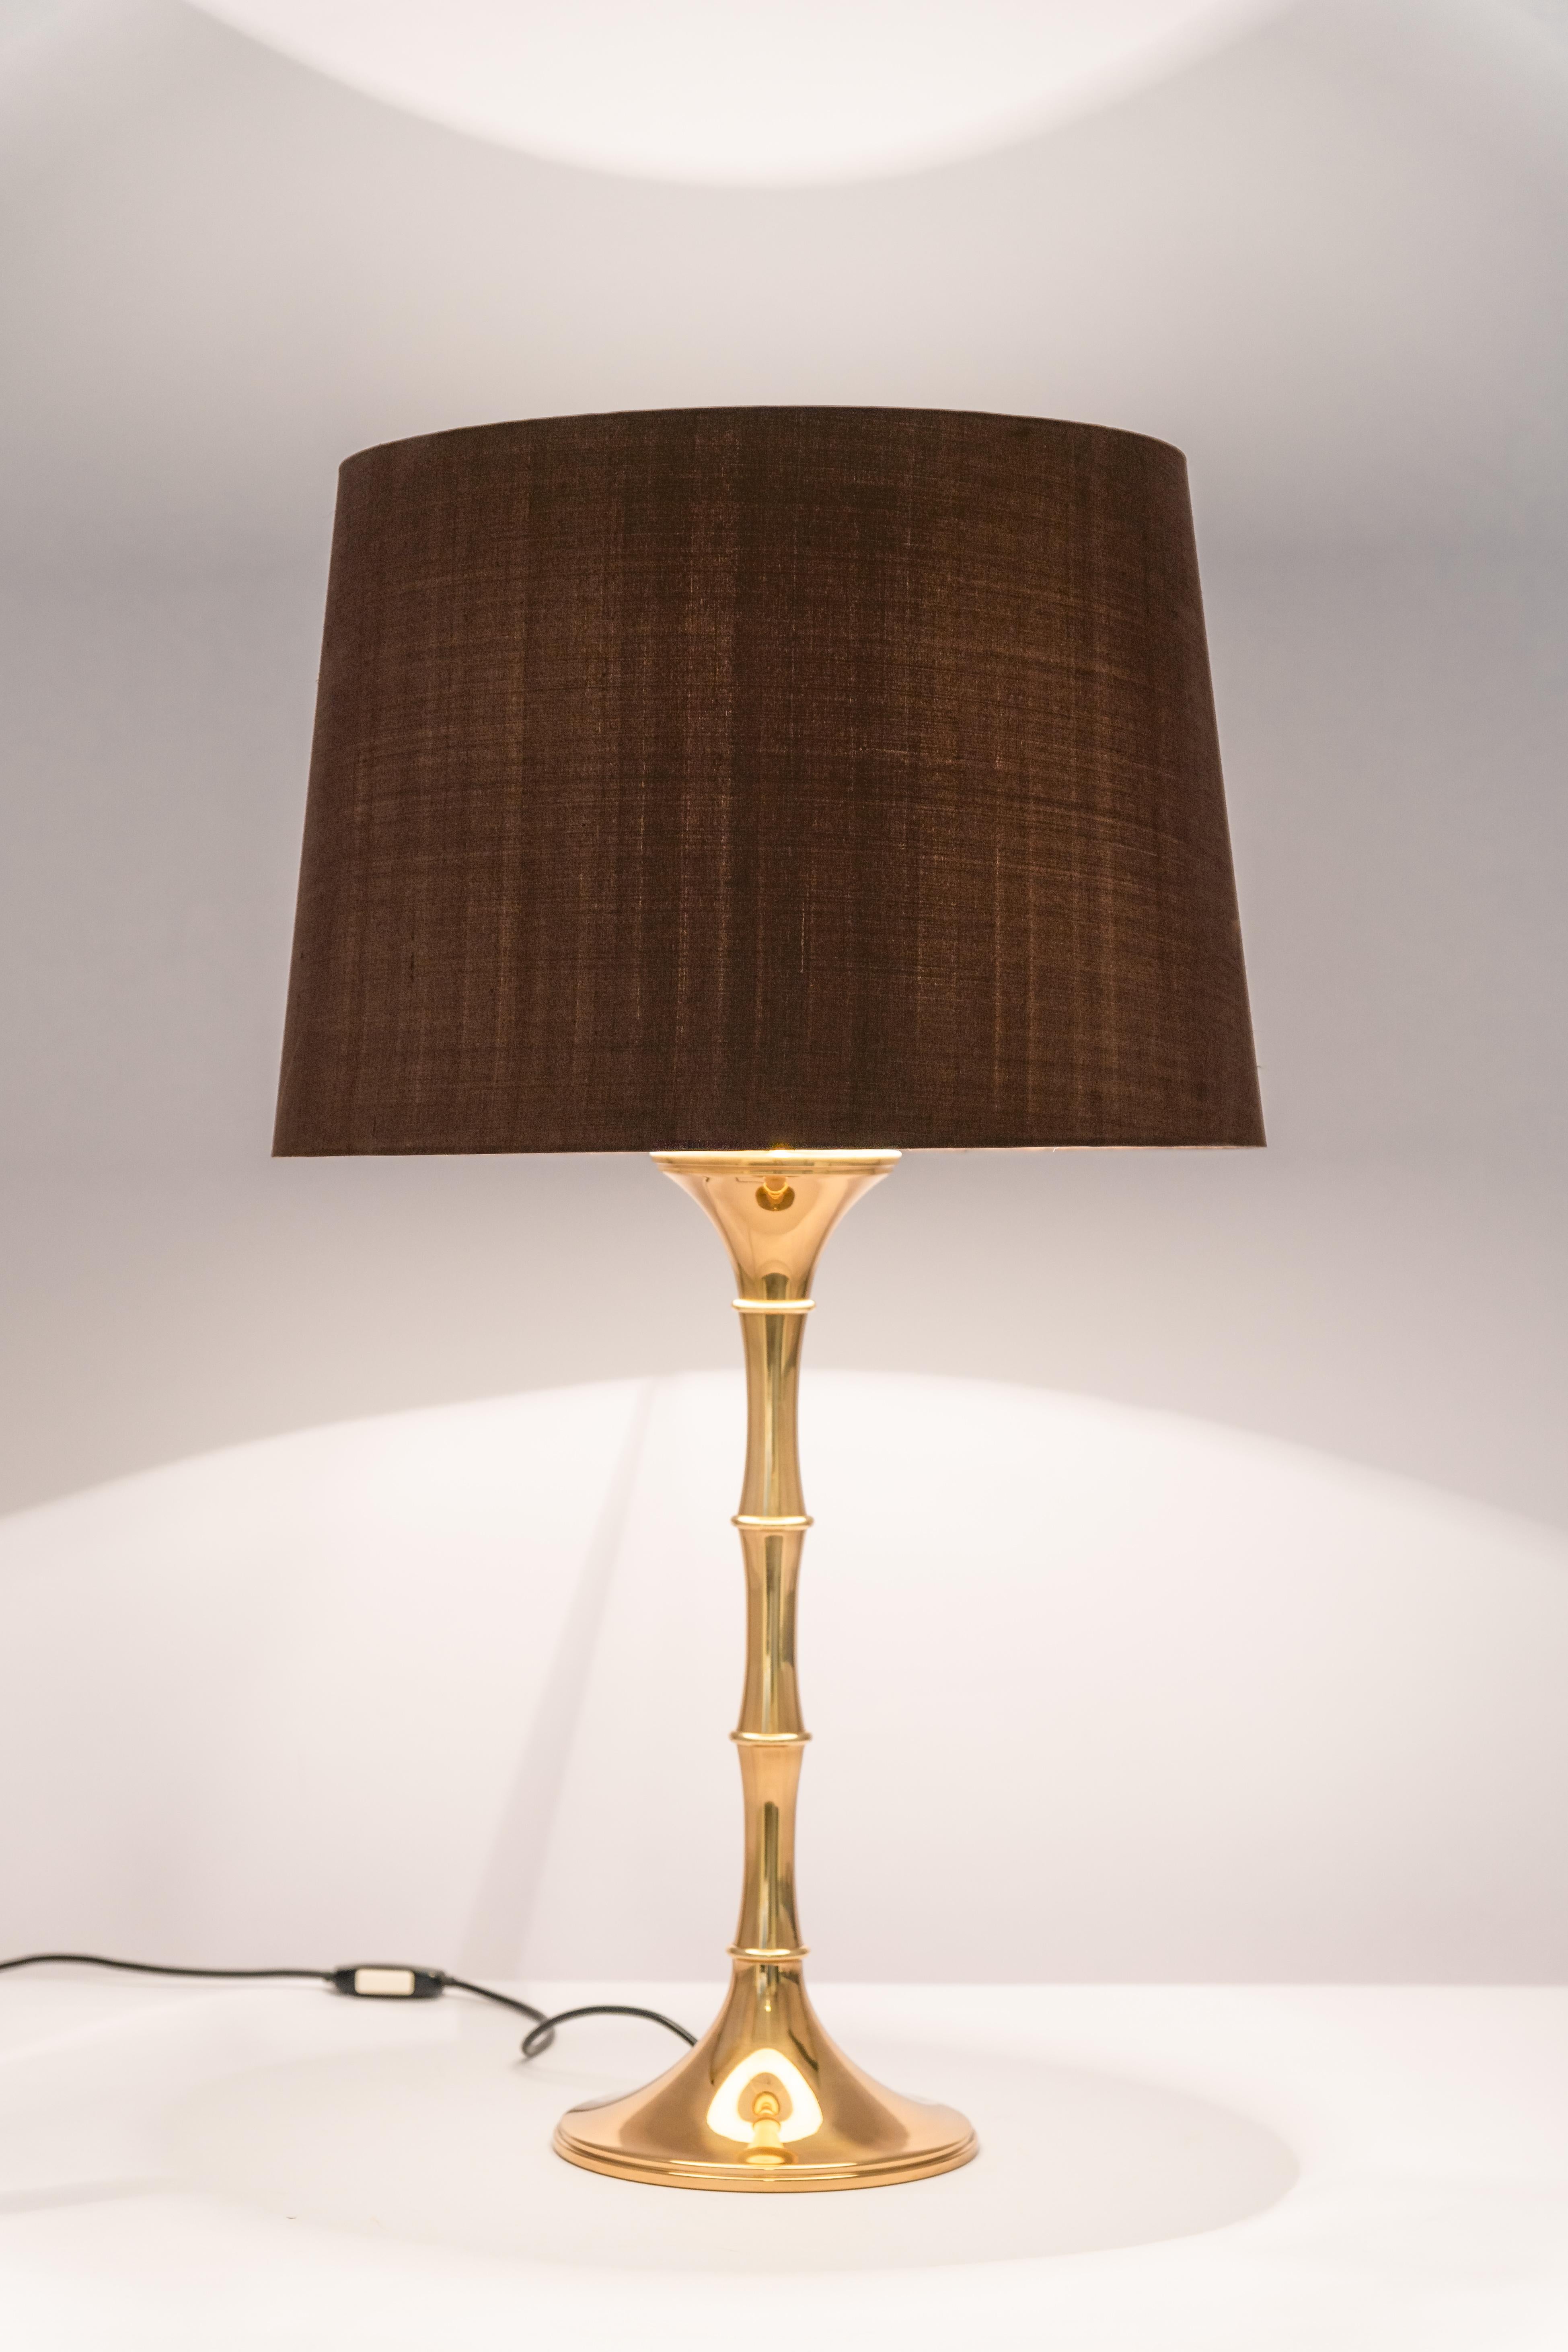 Pair of Bamboo Table Lamps by Ingo Maurer, Germany, 1970s For Sale 7